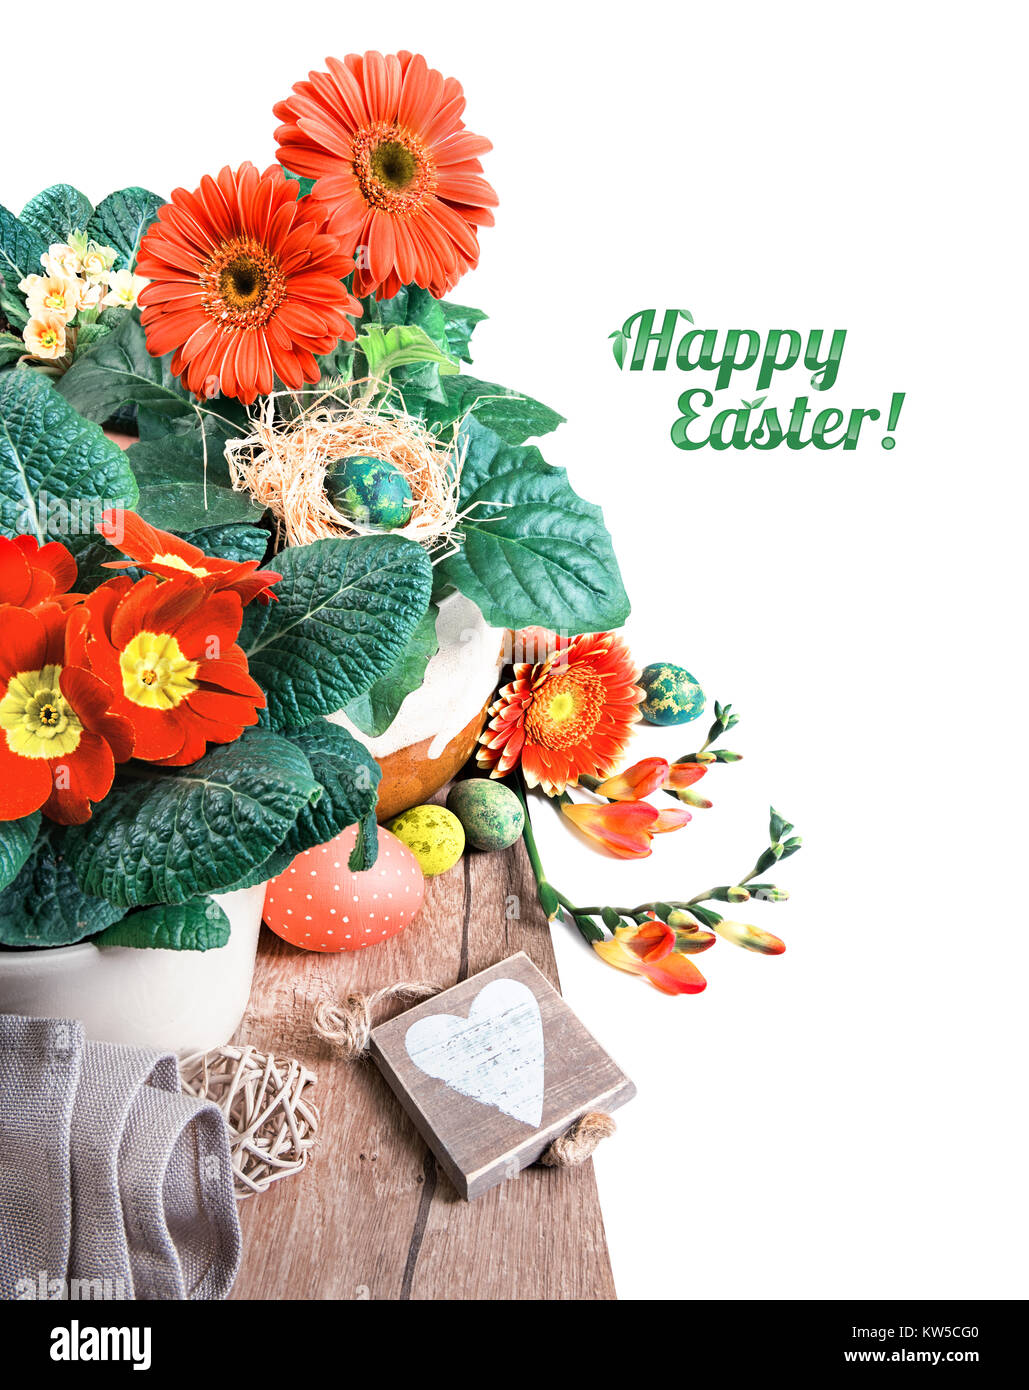 Easter border with orange herbera, freesias and spring decorations, caption 'Happy Easter!' on plain white background, space for your text. This image Stock Photo